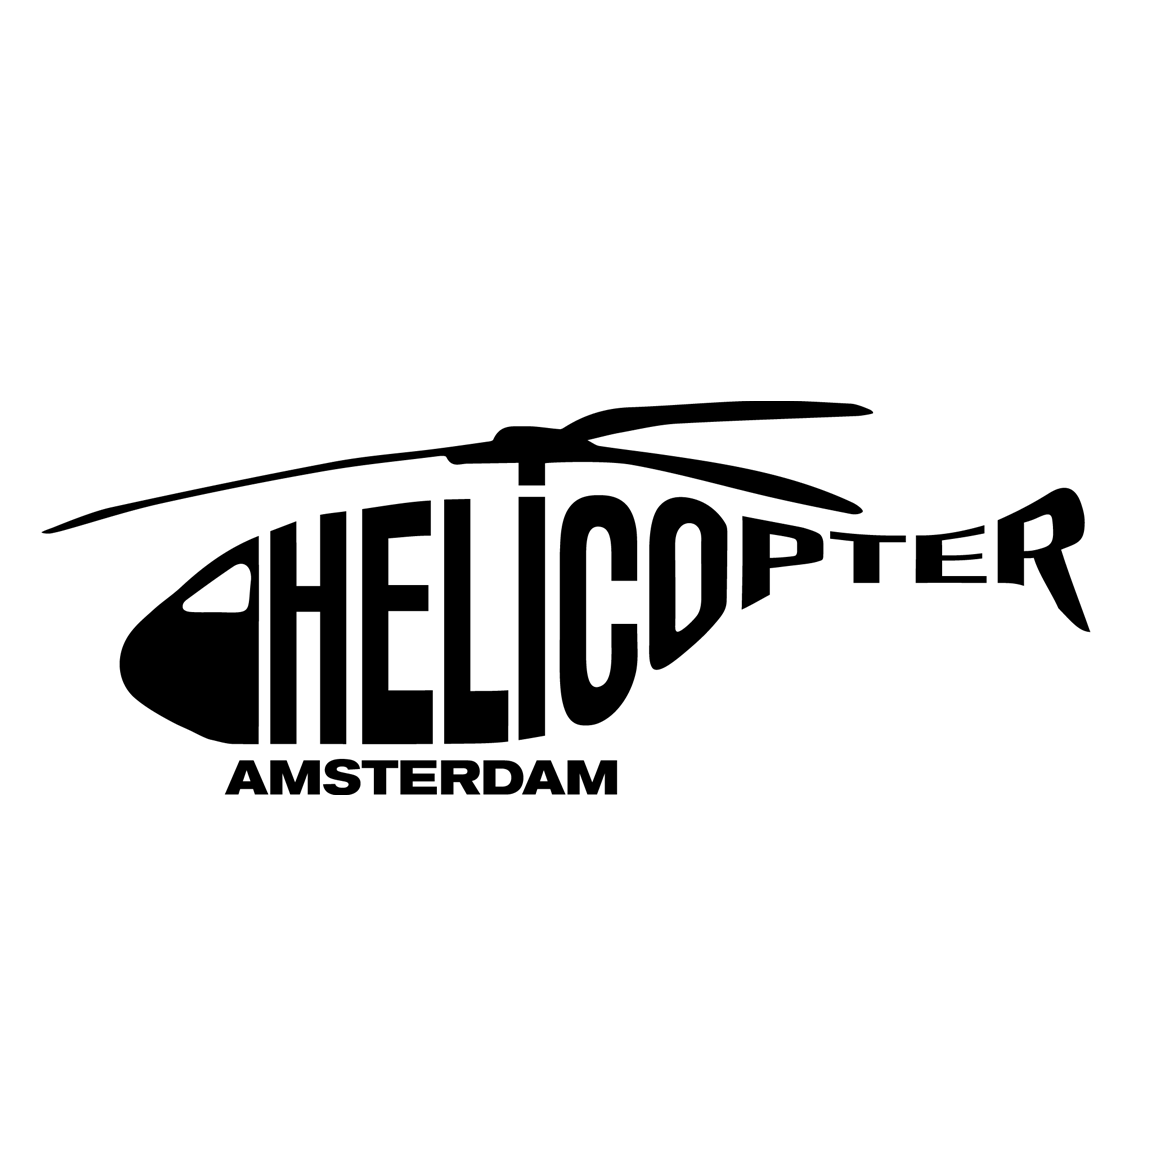 Helicopter Amsterdam